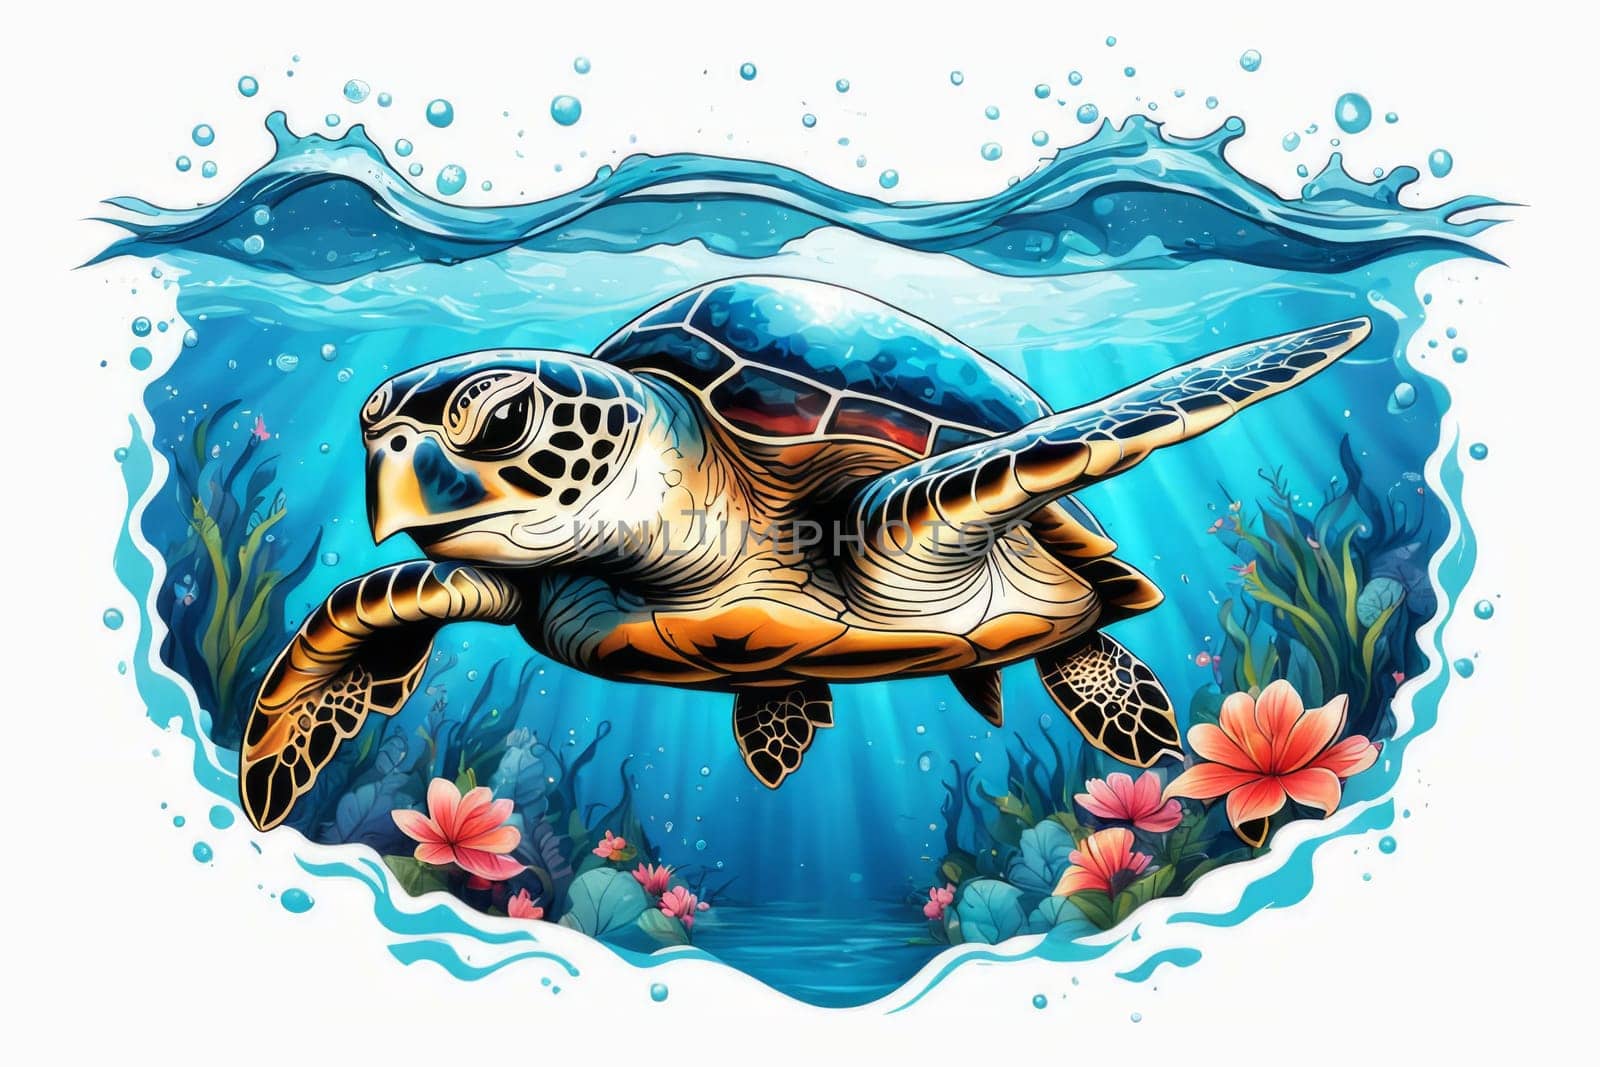 Majestic sea turtle gracefully swimming in ocean depths, surrounded by tranquil beauty of delicate lotus flower. For Tshirt design, posters, postcards, merchandise with marine theme, childrens books